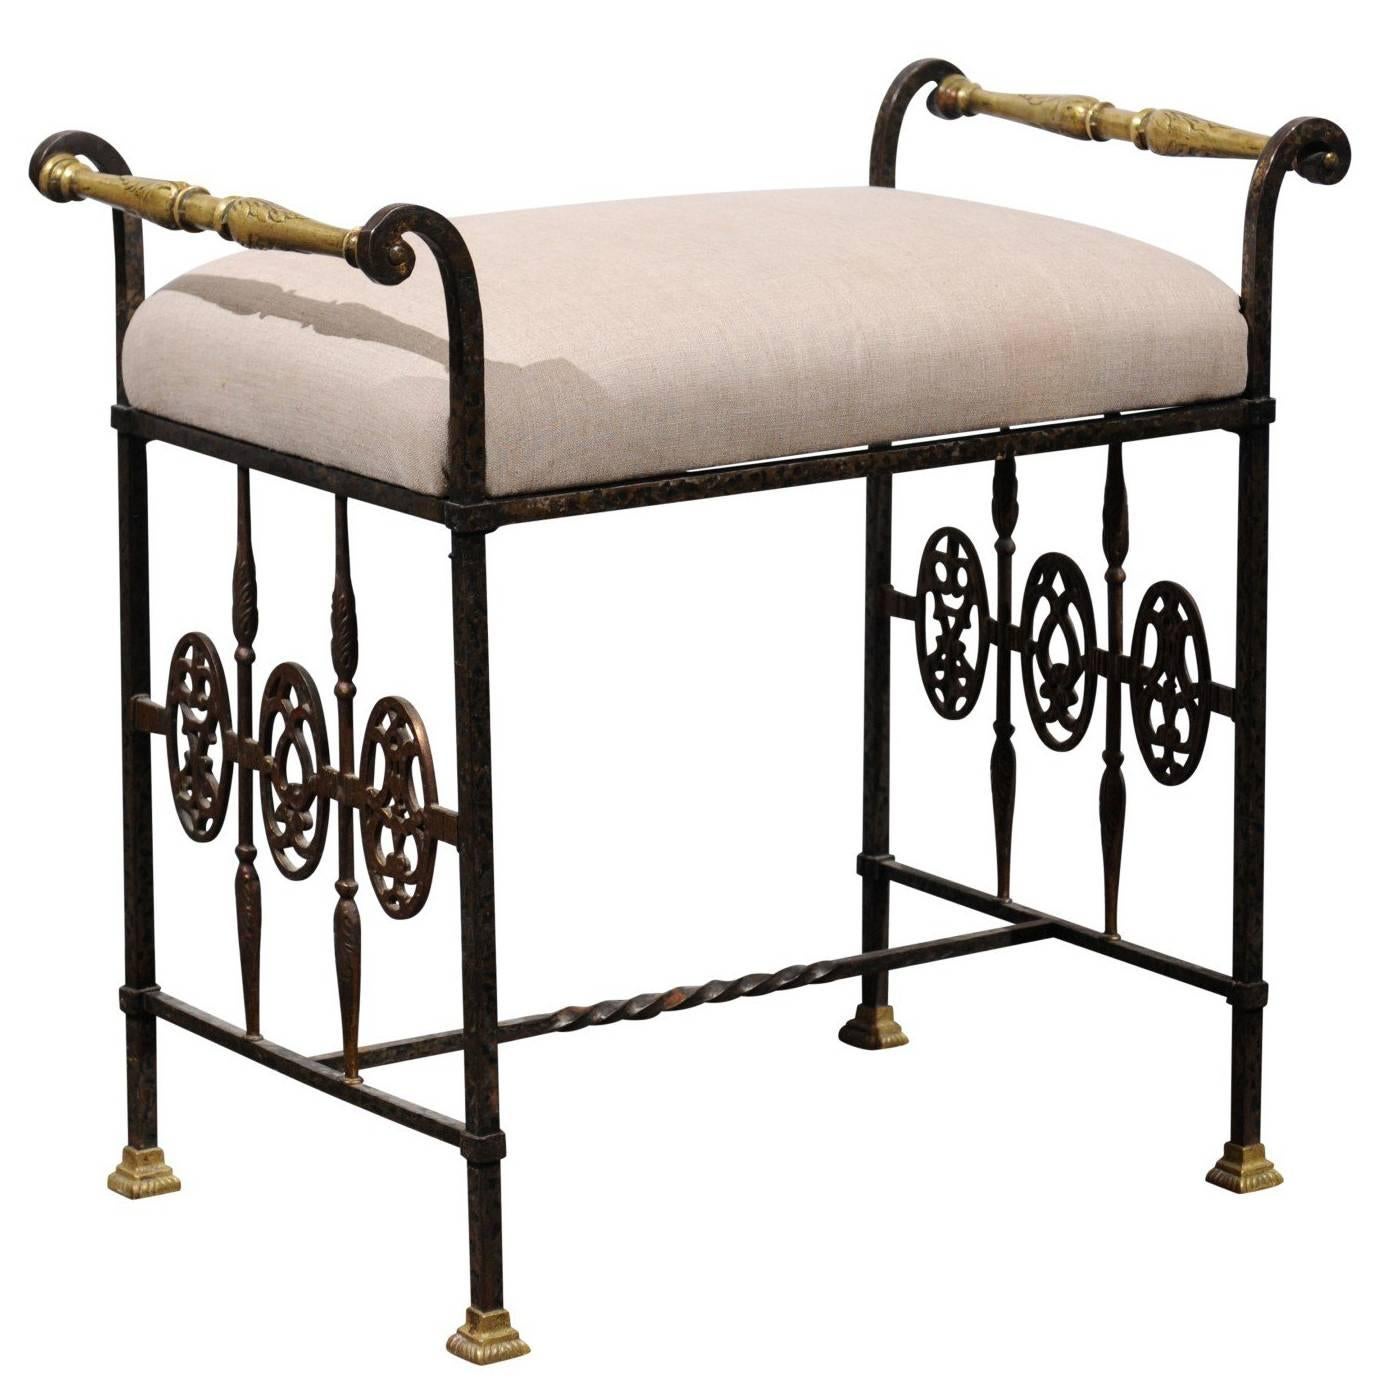 Italian 1920s Wrought-Iron Upholstered Bench with Bronze Accents